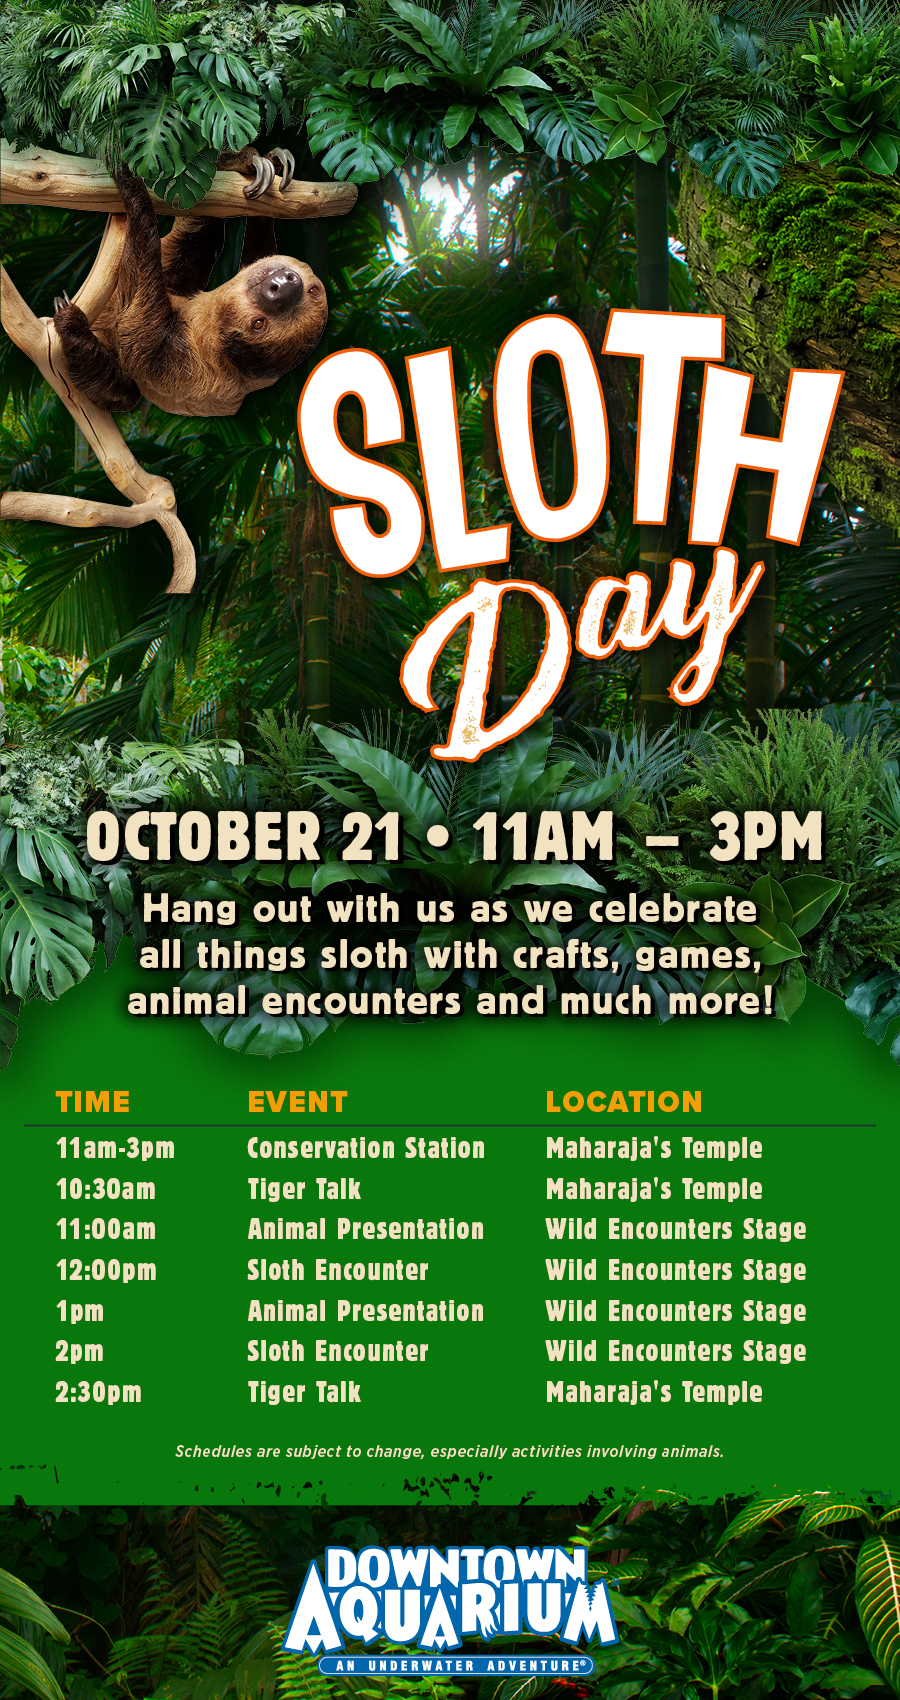 Sloth weekend October 20 1pm and 2pm.